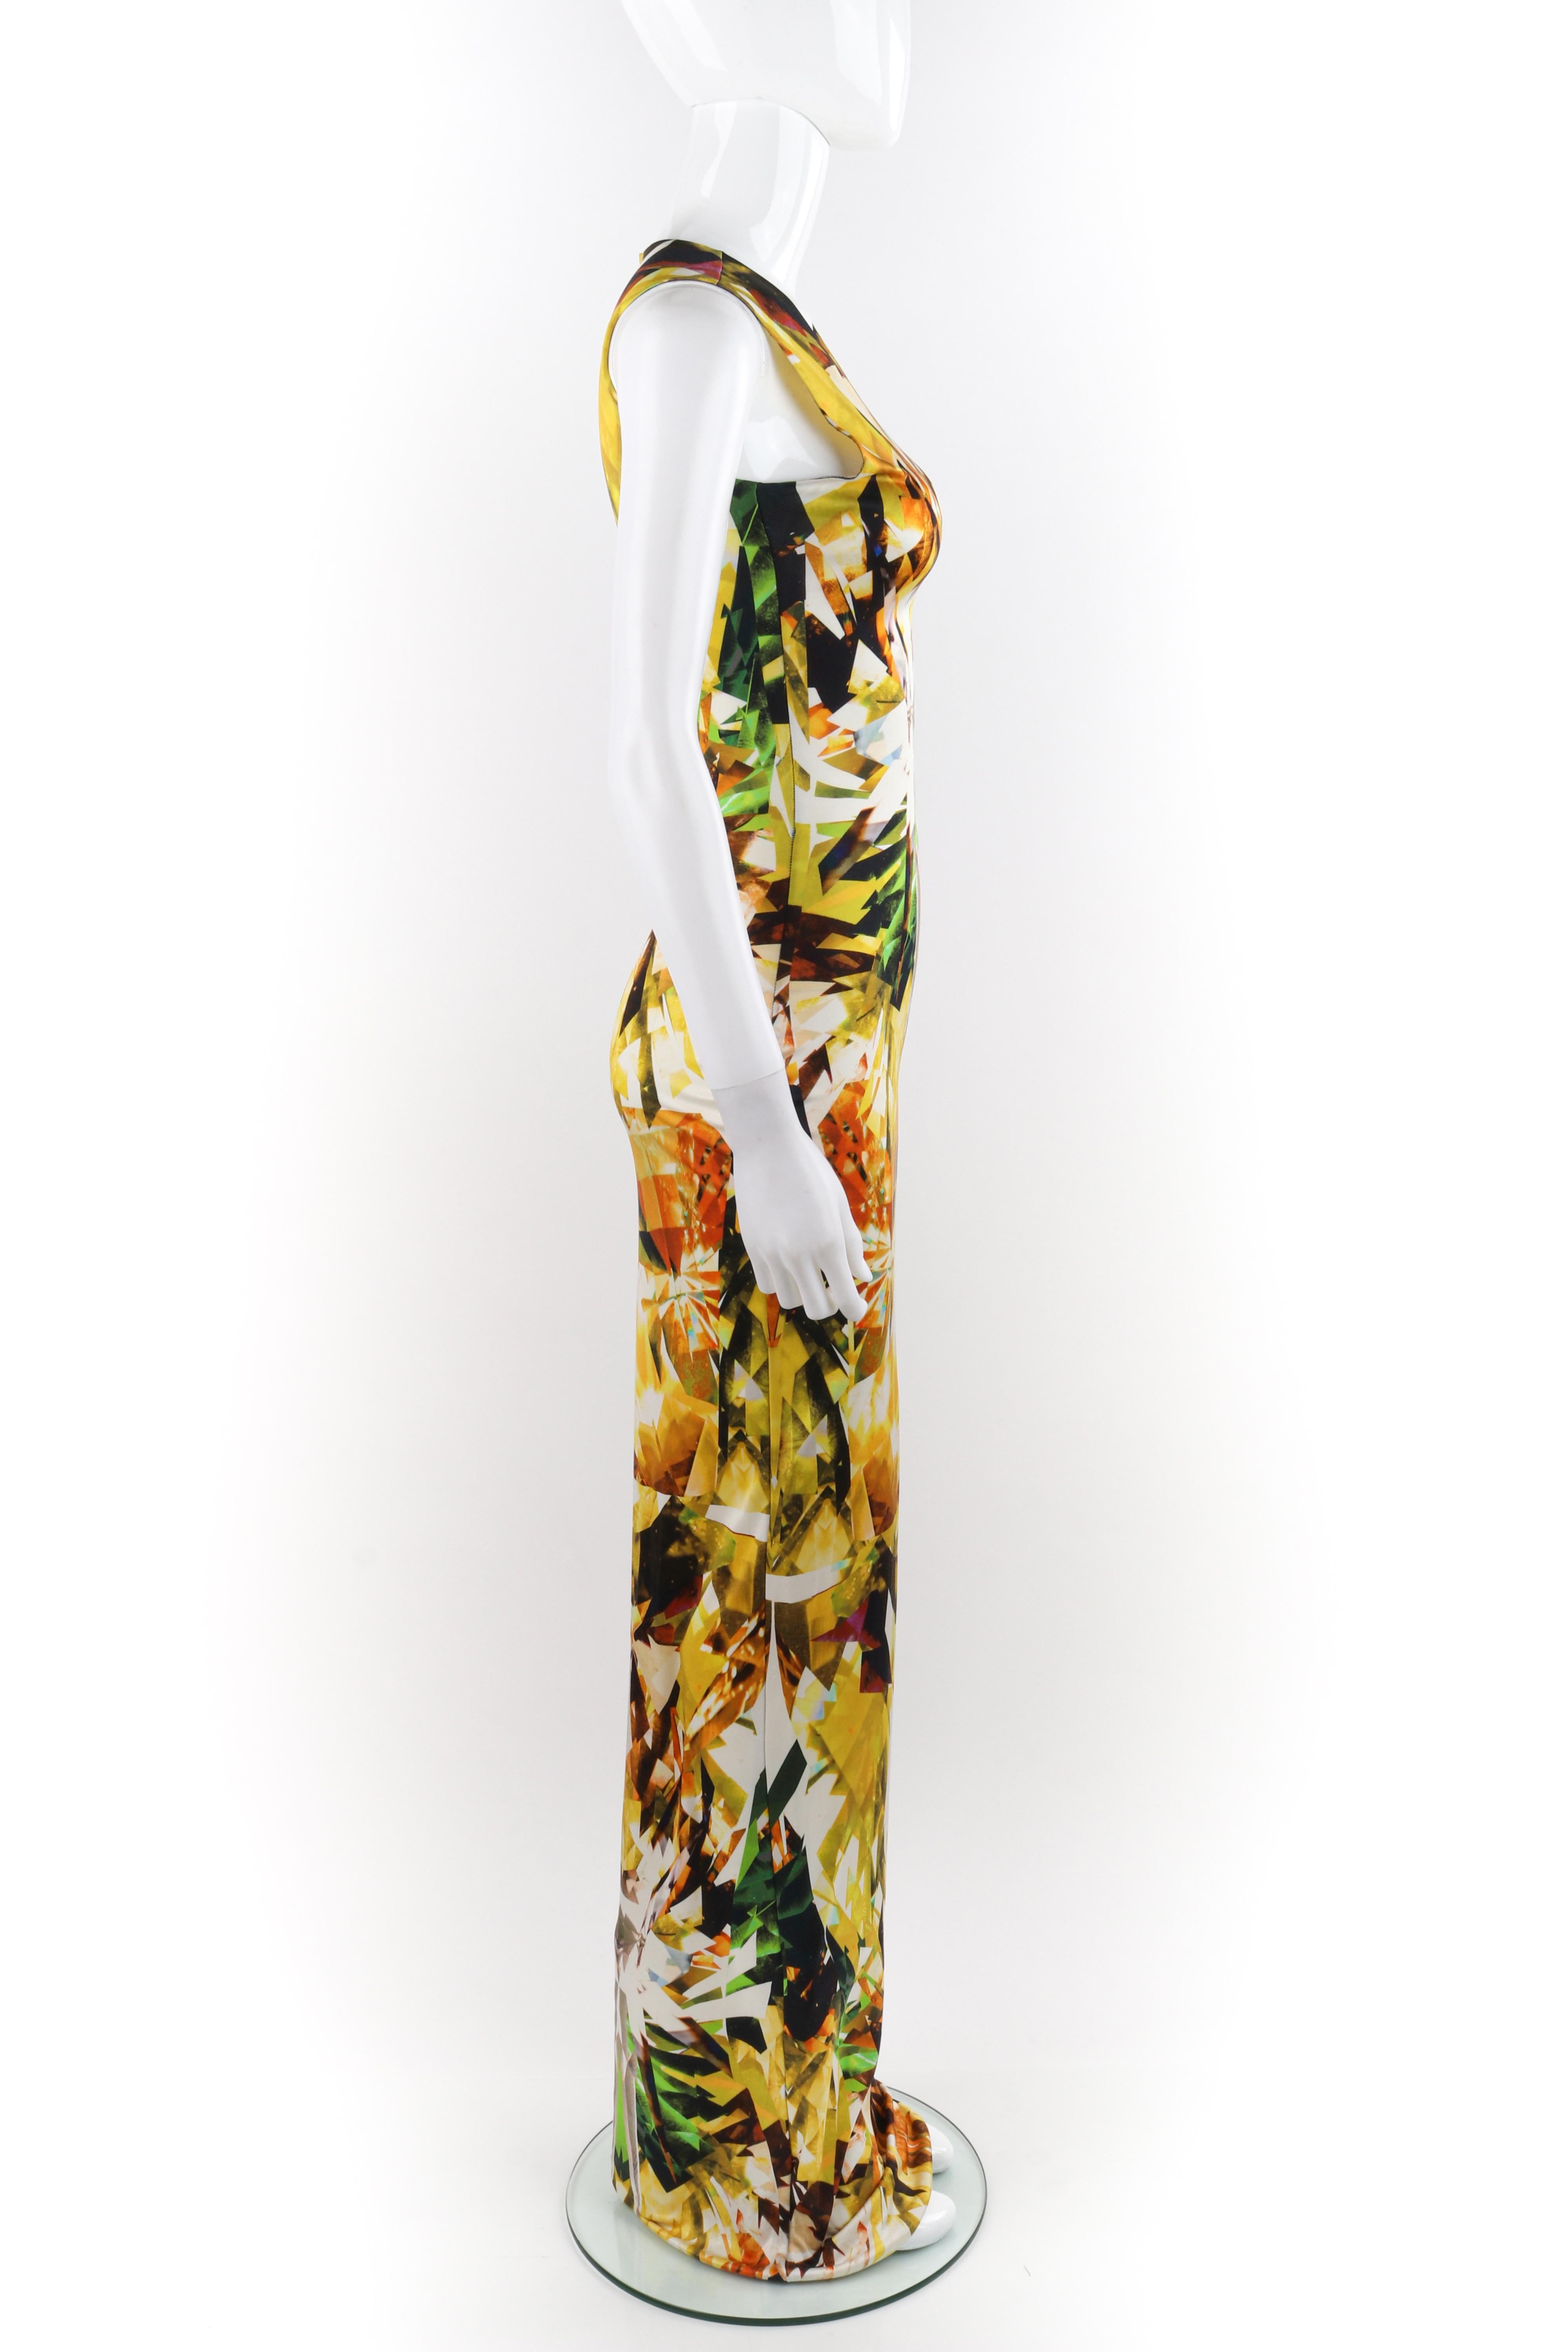 ALEXANDER McQUEEN S/S 2009 “Natural Distinction” Crystal Kaleidoscope Maxi Dress In Good Condition For Sale In Thiensville, WI